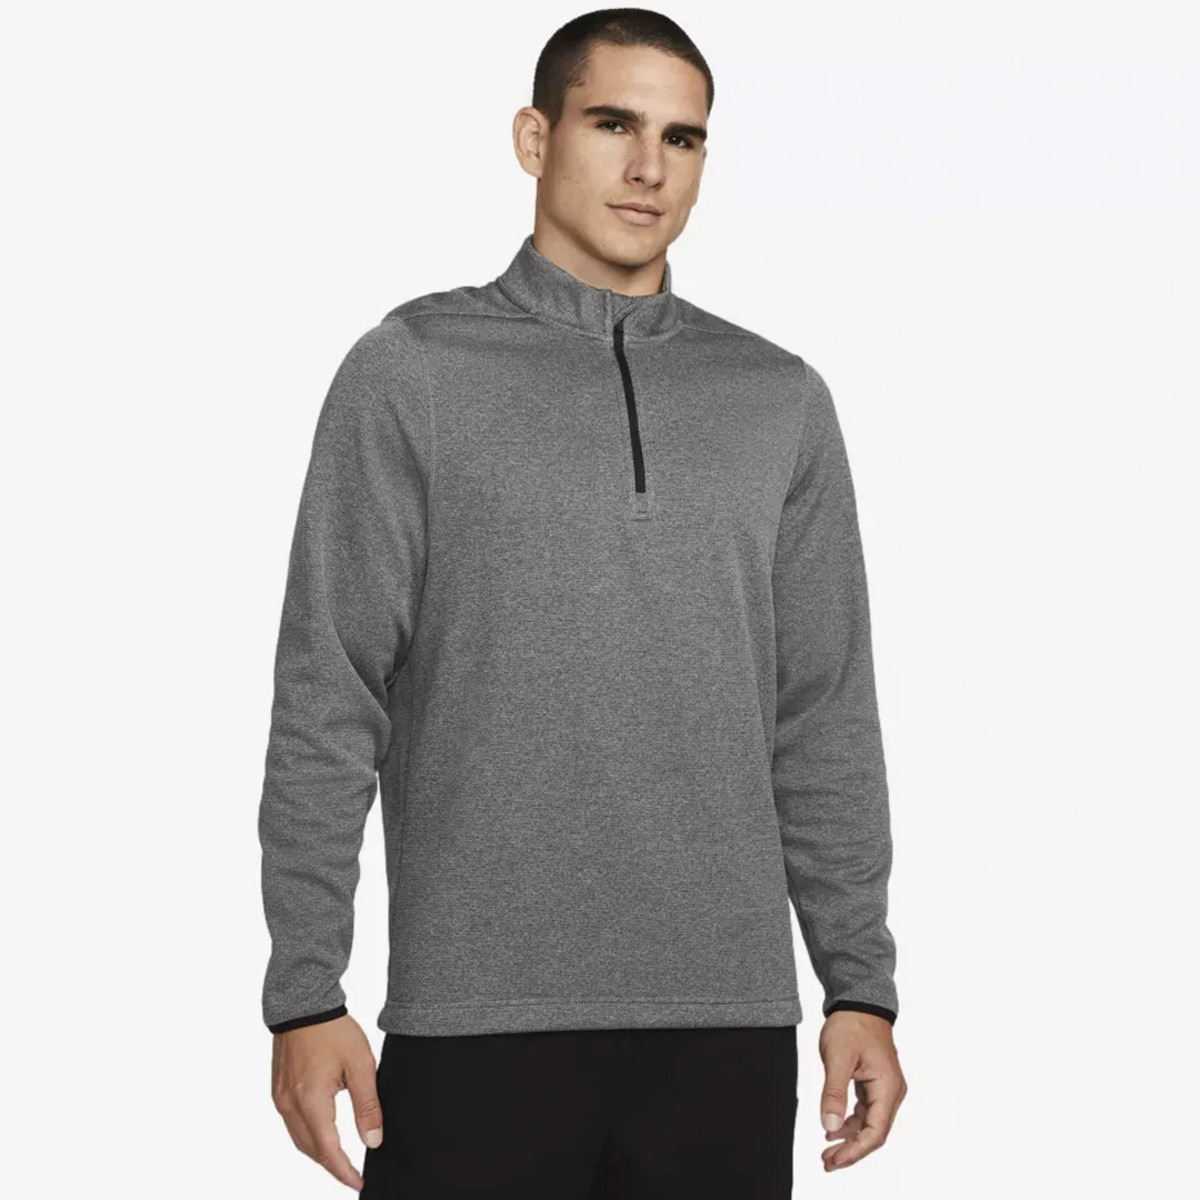 The Nike Therma-Fit Victory Quarter-Zip Golf Top is on sale right now at PGA Tour Superstore